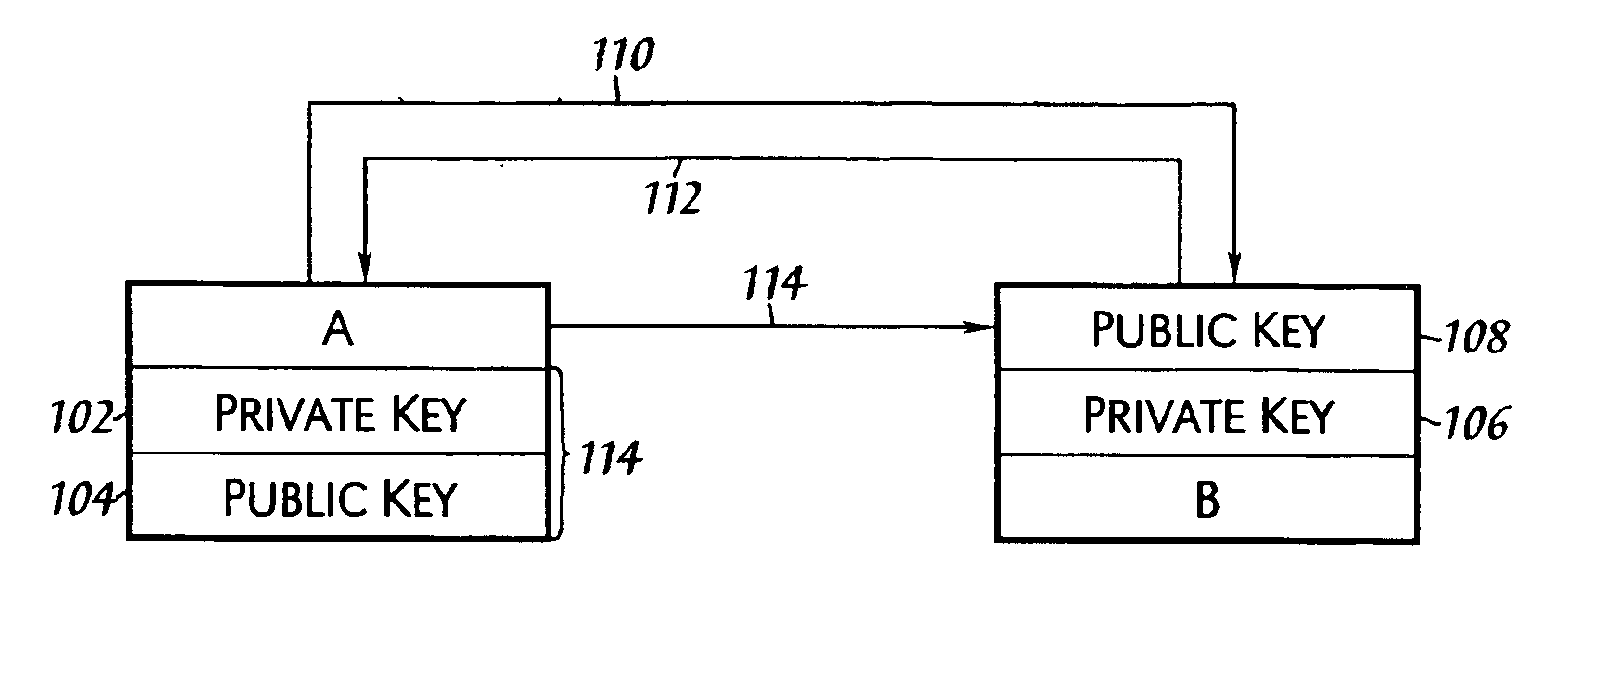 Composite keystore facility apparatus and method therefor